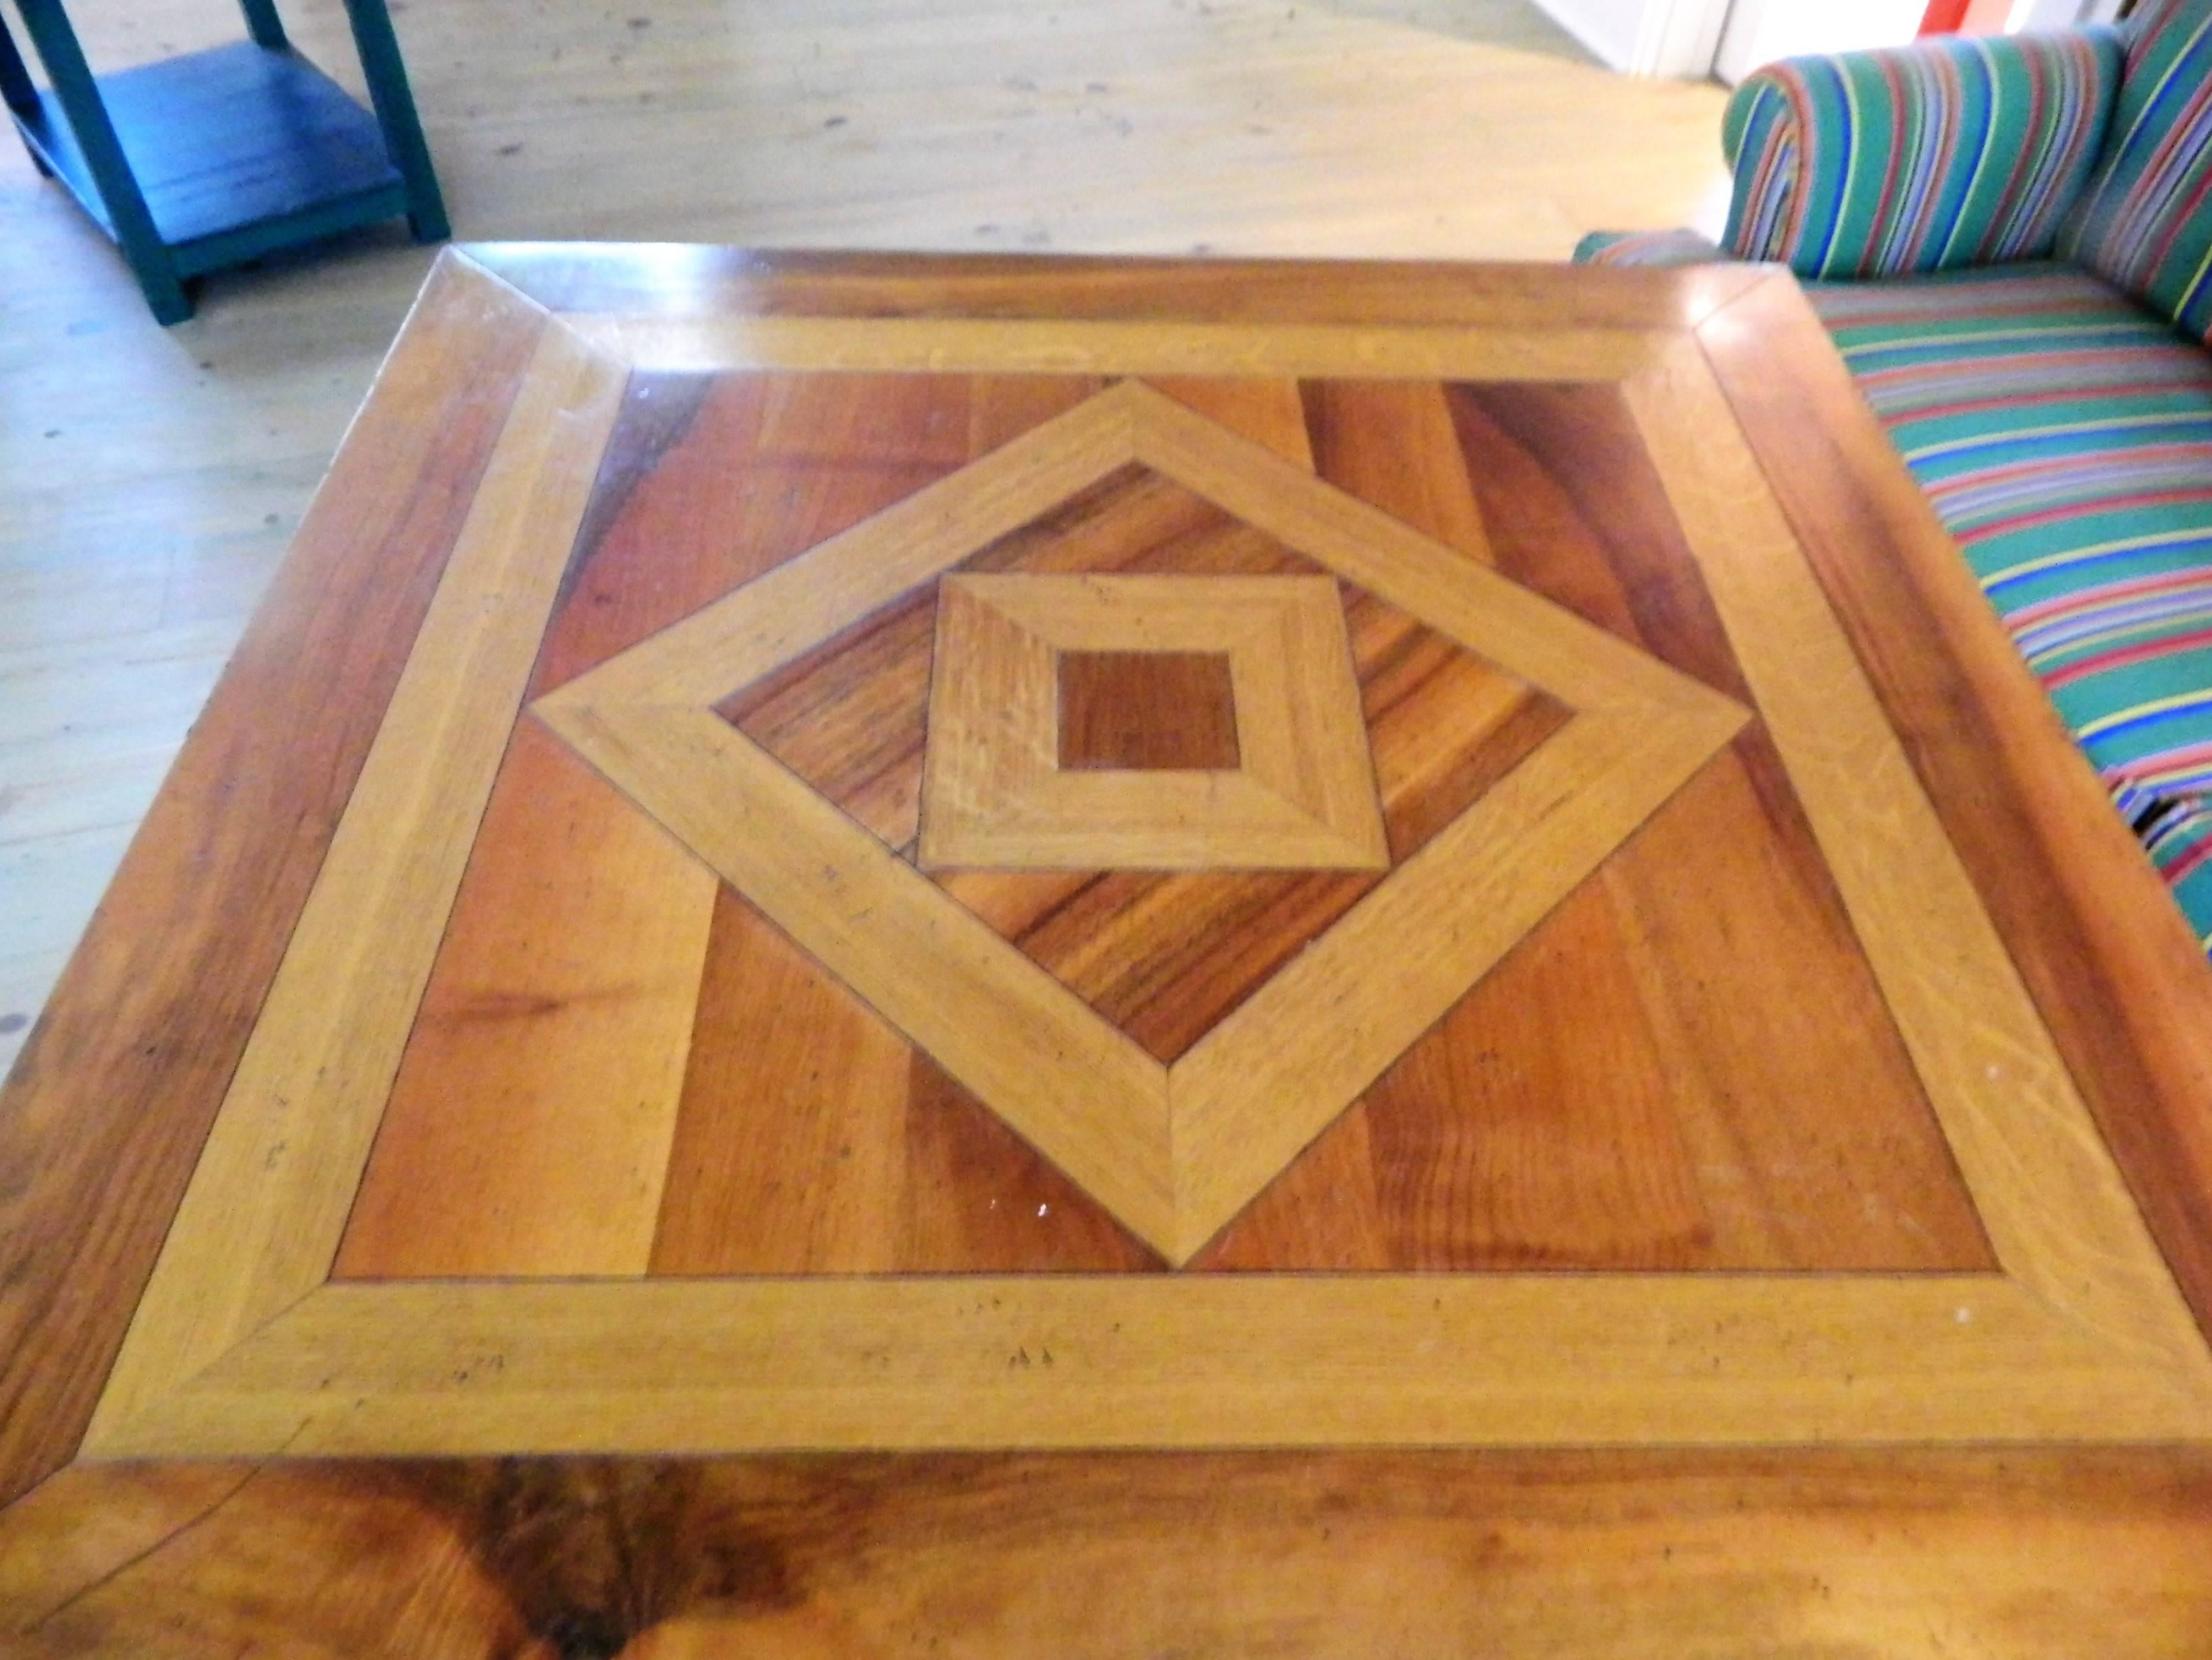 Custom-made square marquetry dining table with inlay design, 20th century.  When all four sides are extended, it measures 55" x 55".  When they are closed, the table measures 39.5" x 39.5"
 